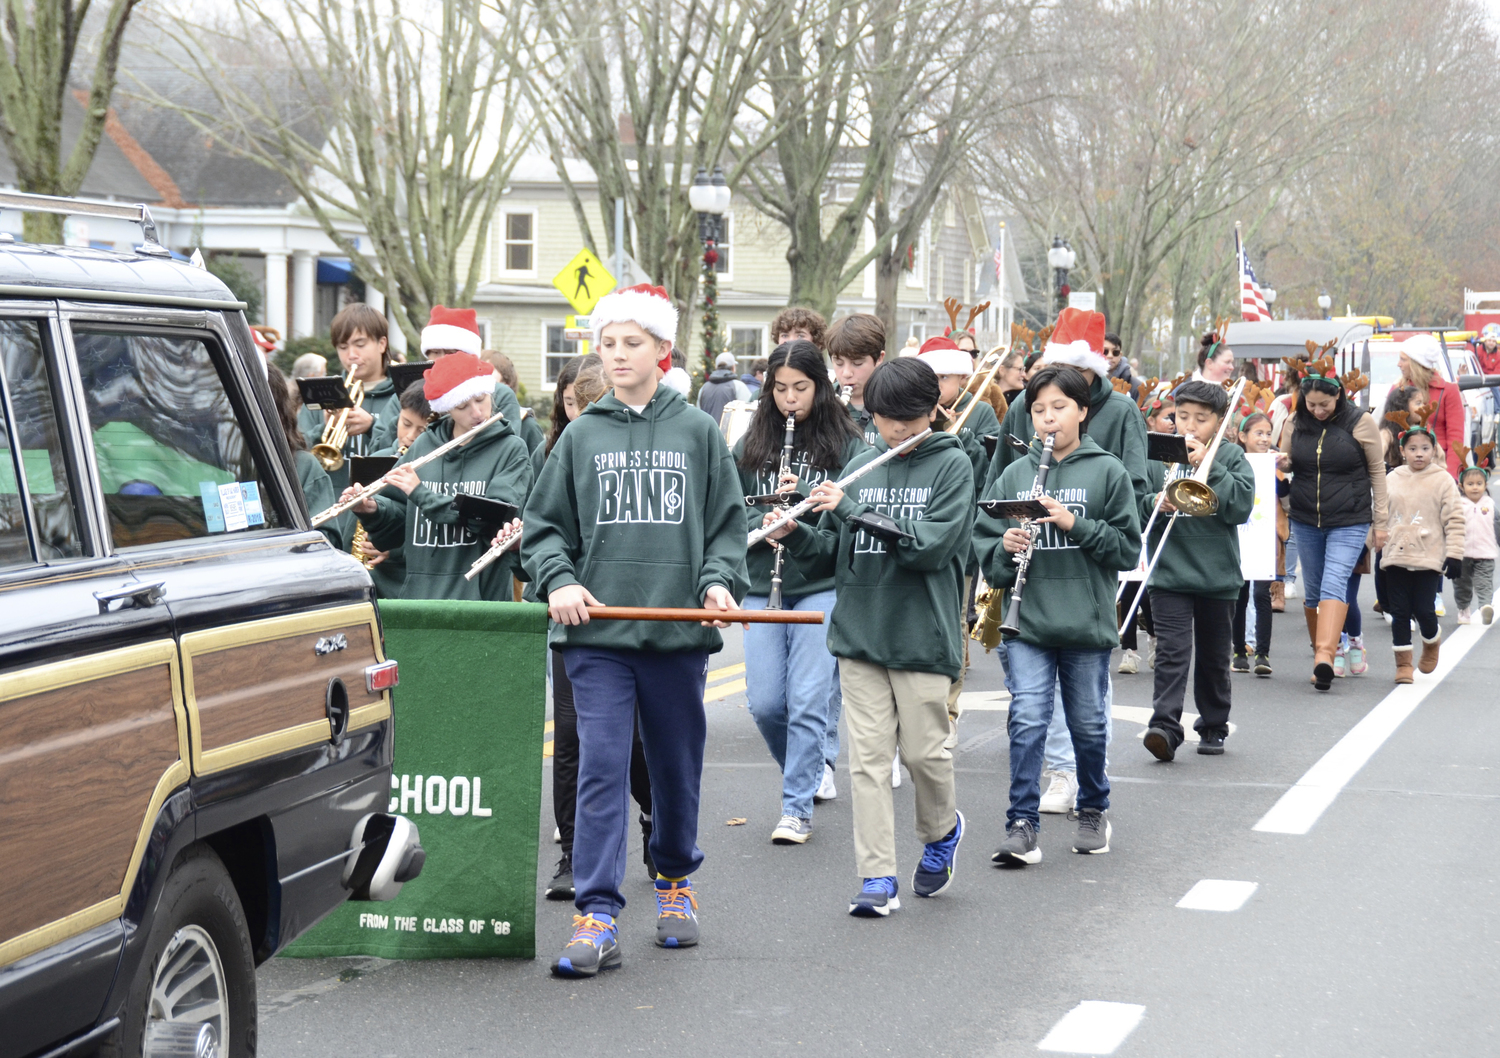 The Springs School Band performs during the Santa Parade in East Hampton on Saturday.